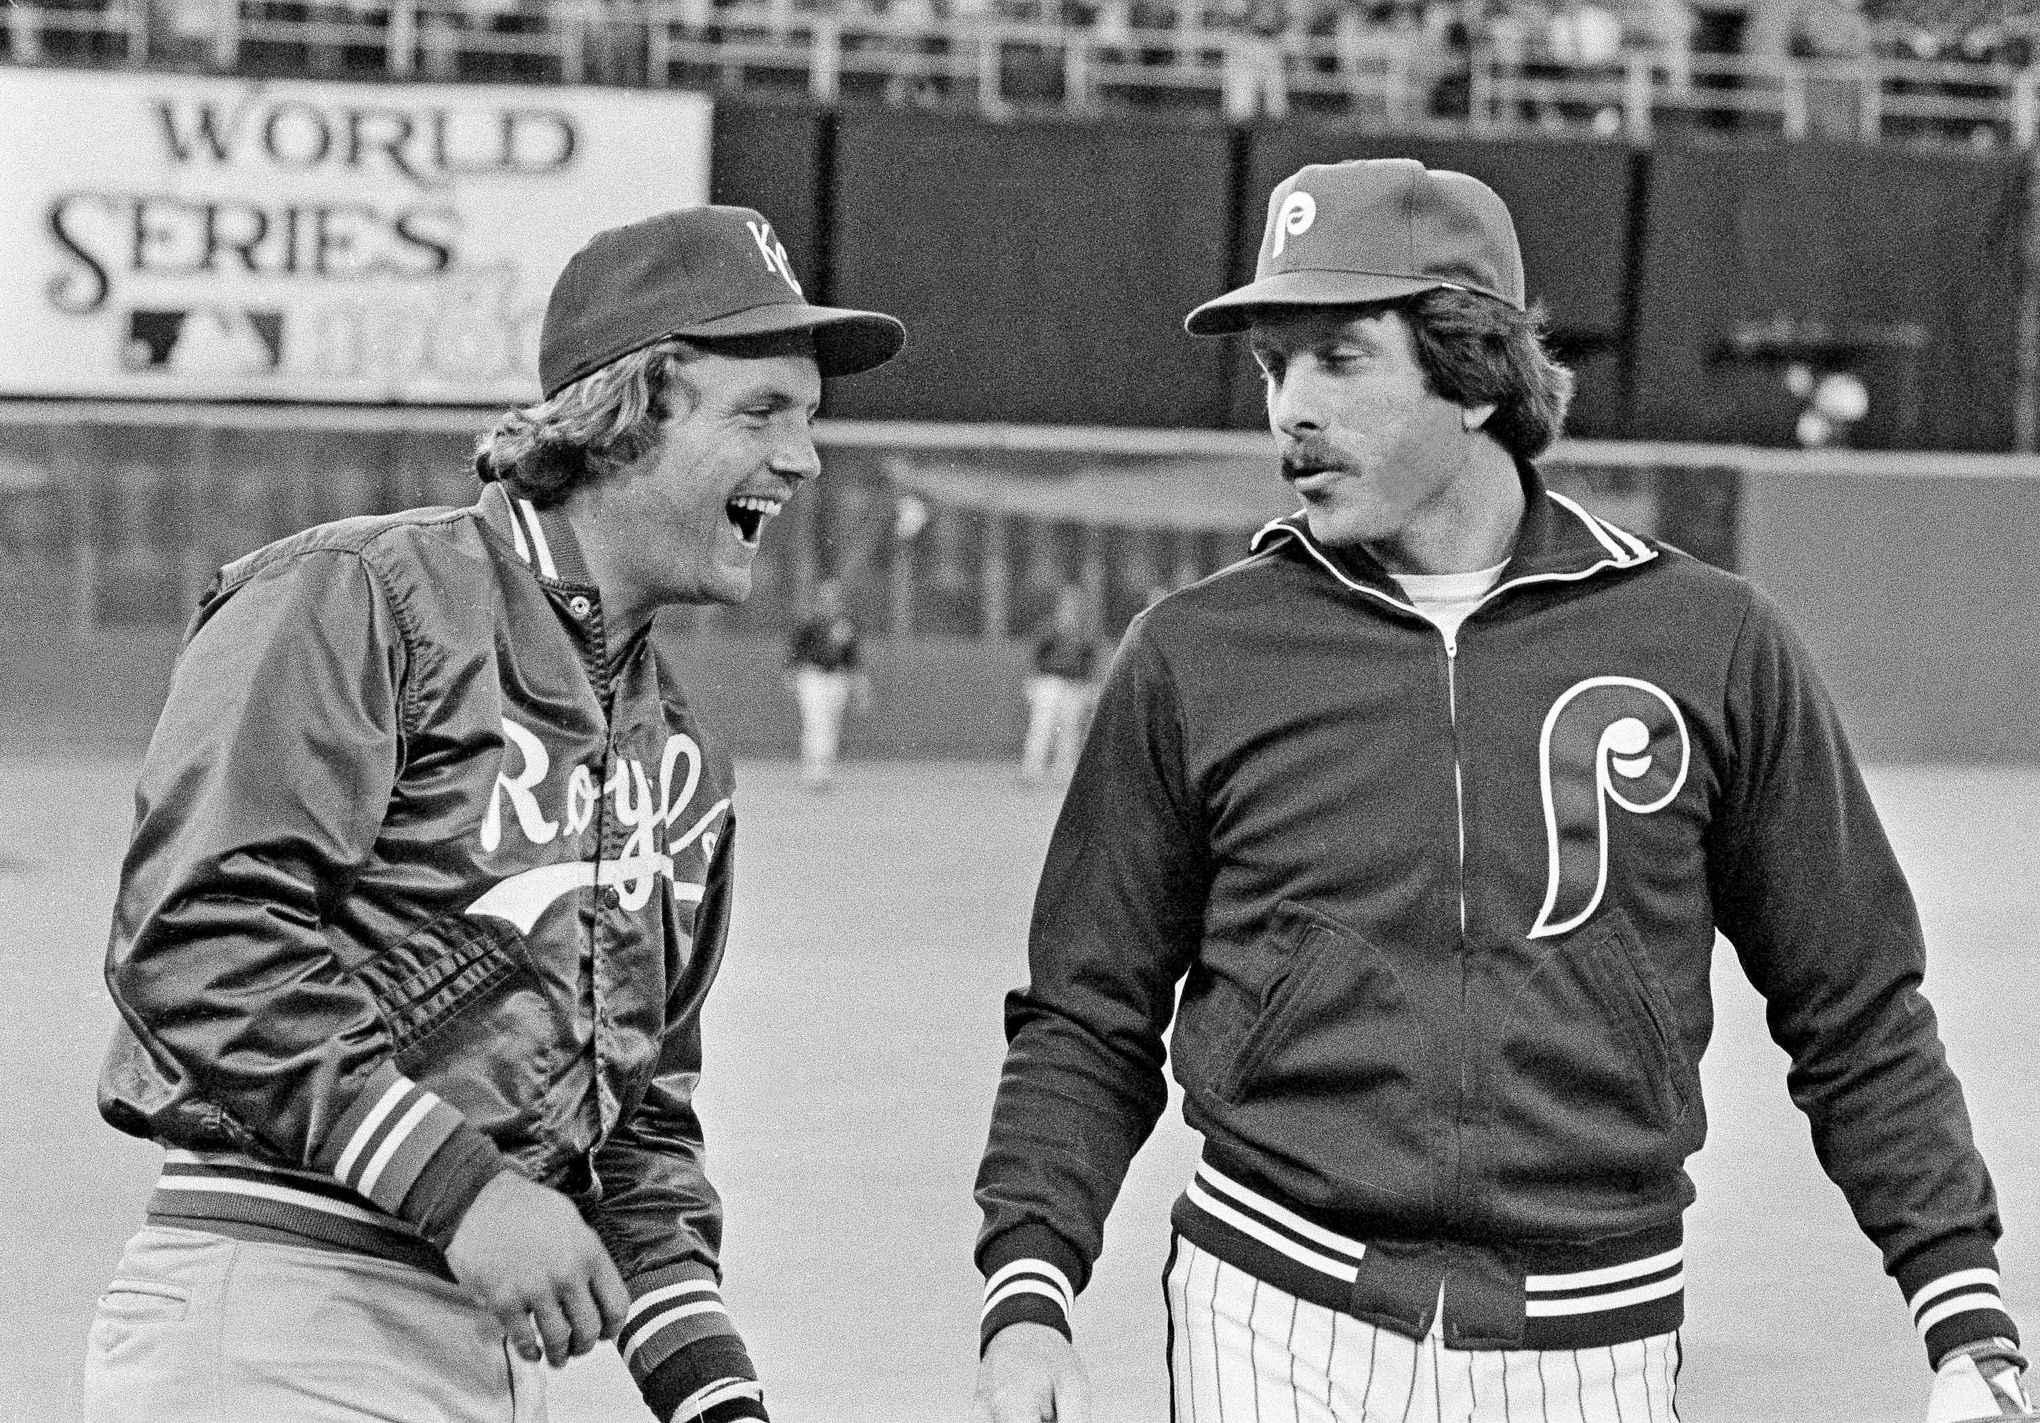 Mike Schmidt, widely considered amongst the greatest third basemen